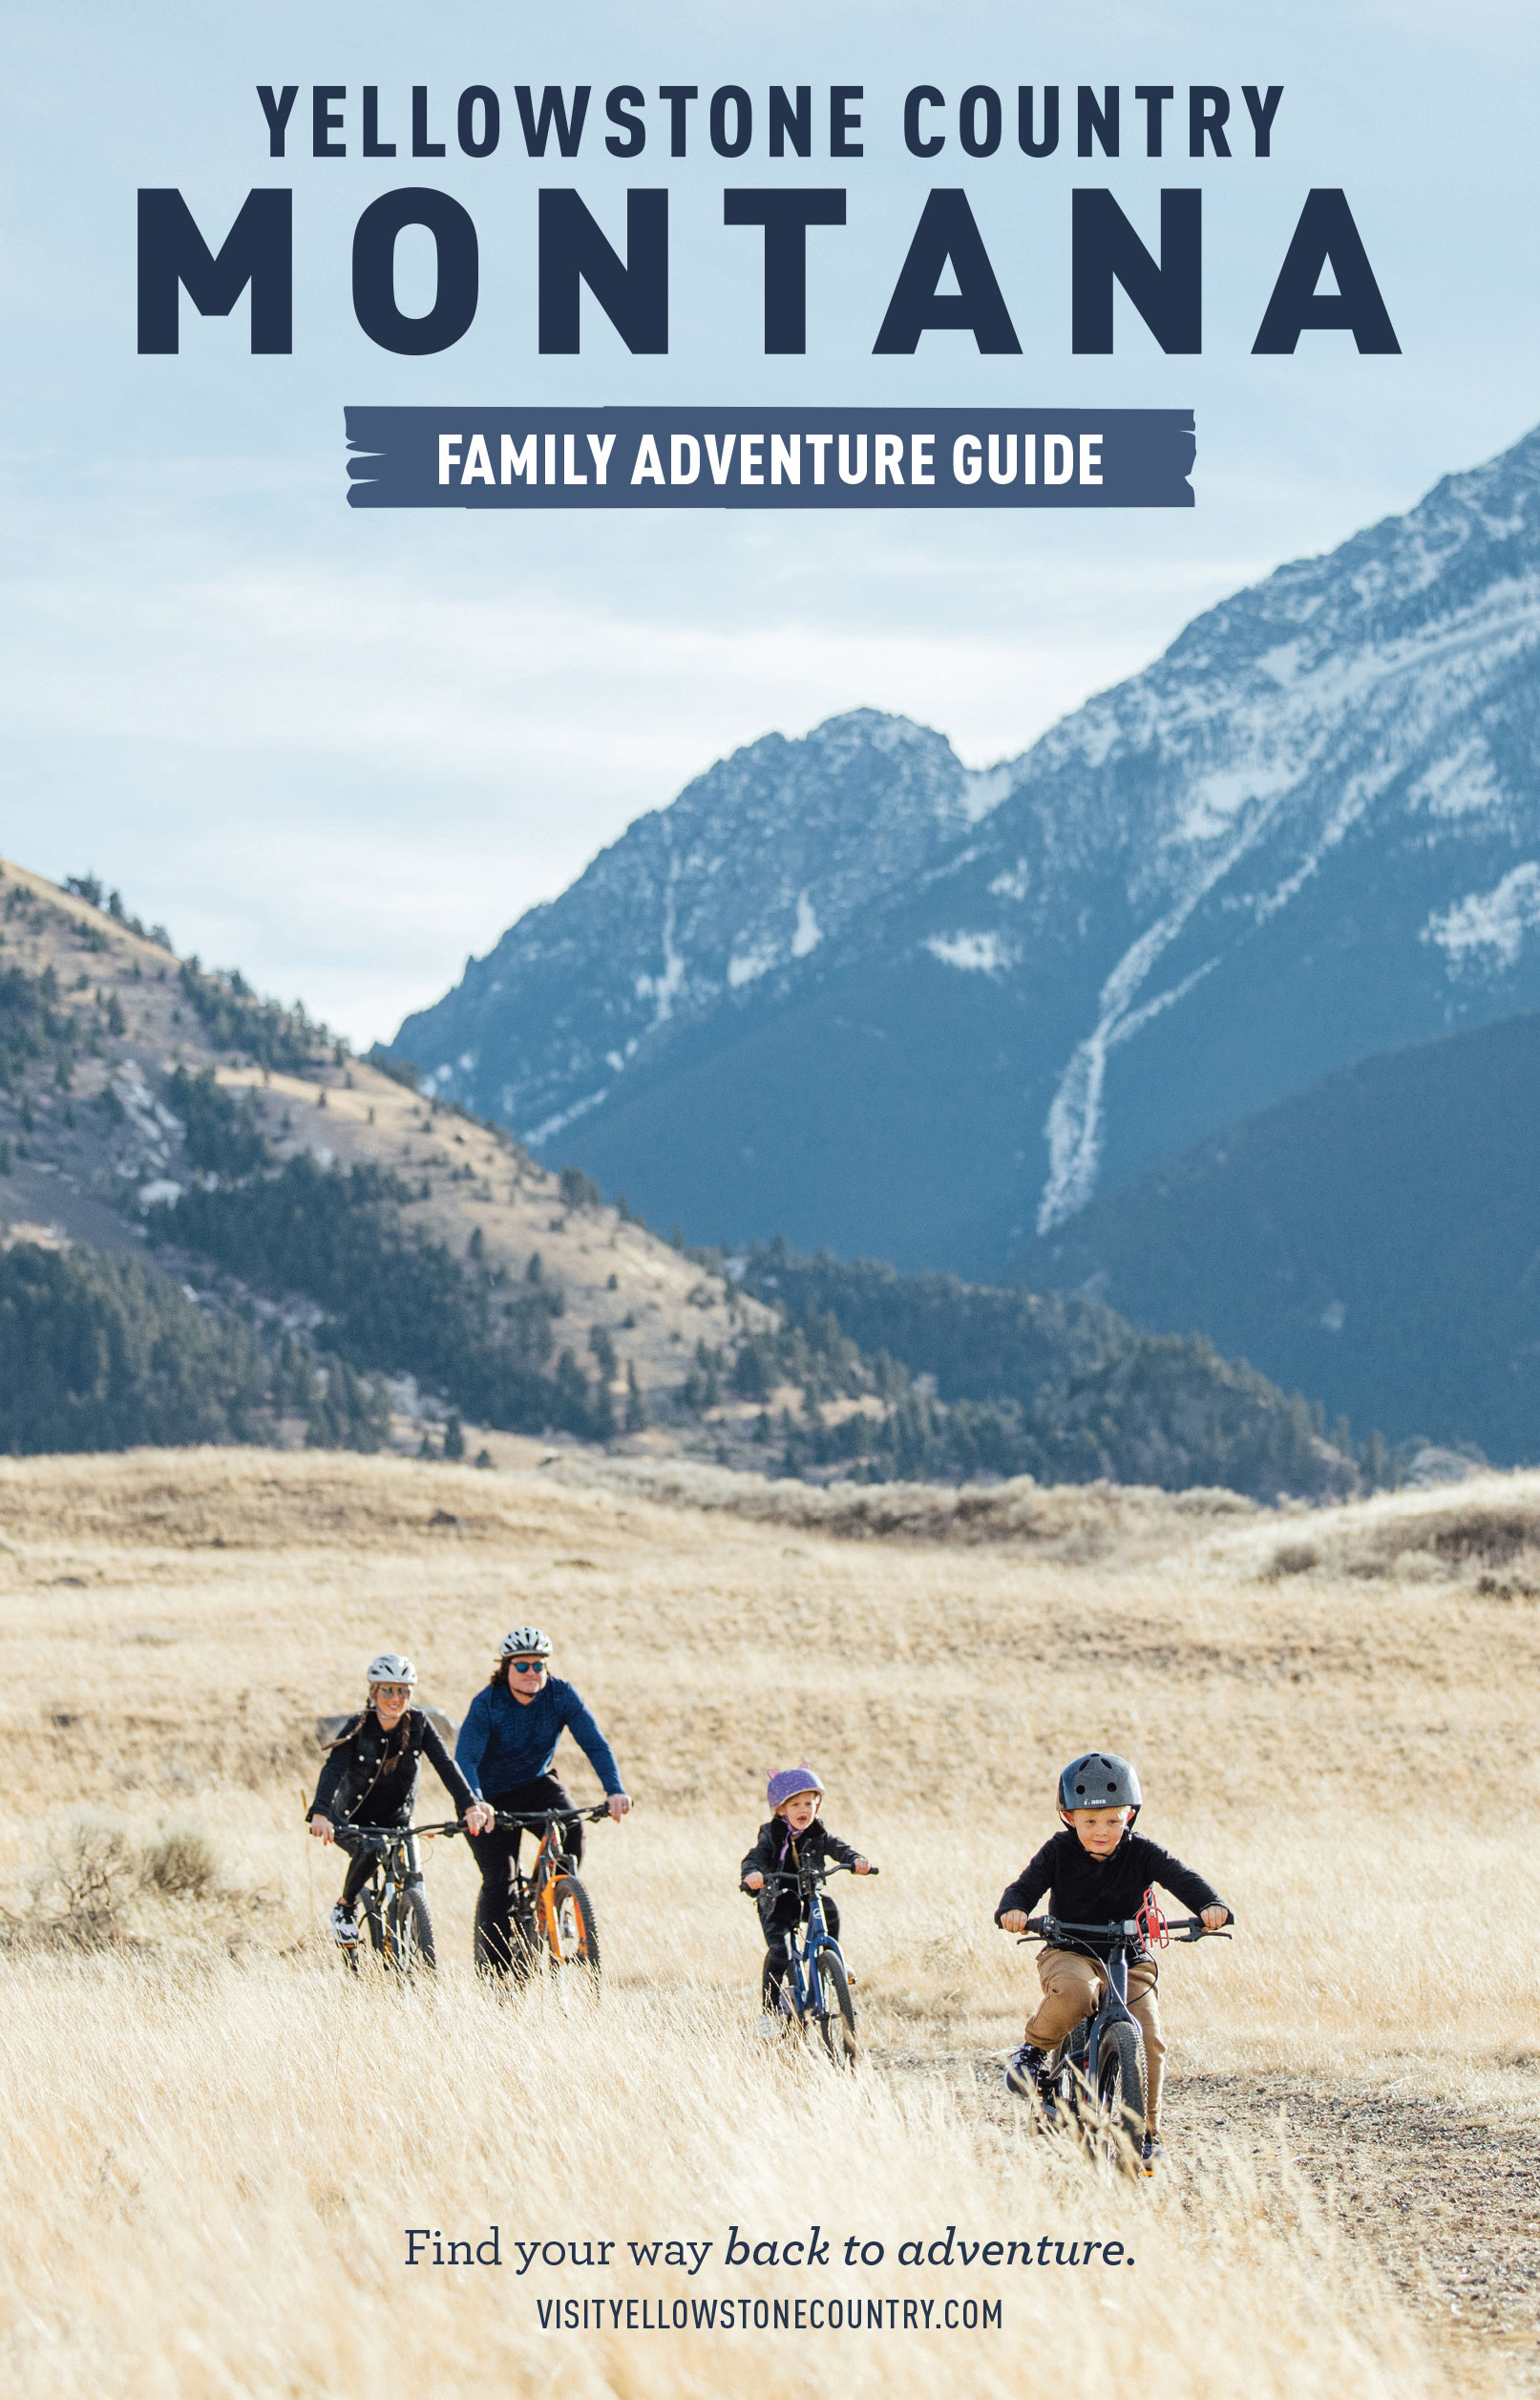 The official Yellowstone Country Montana Travel Guide.